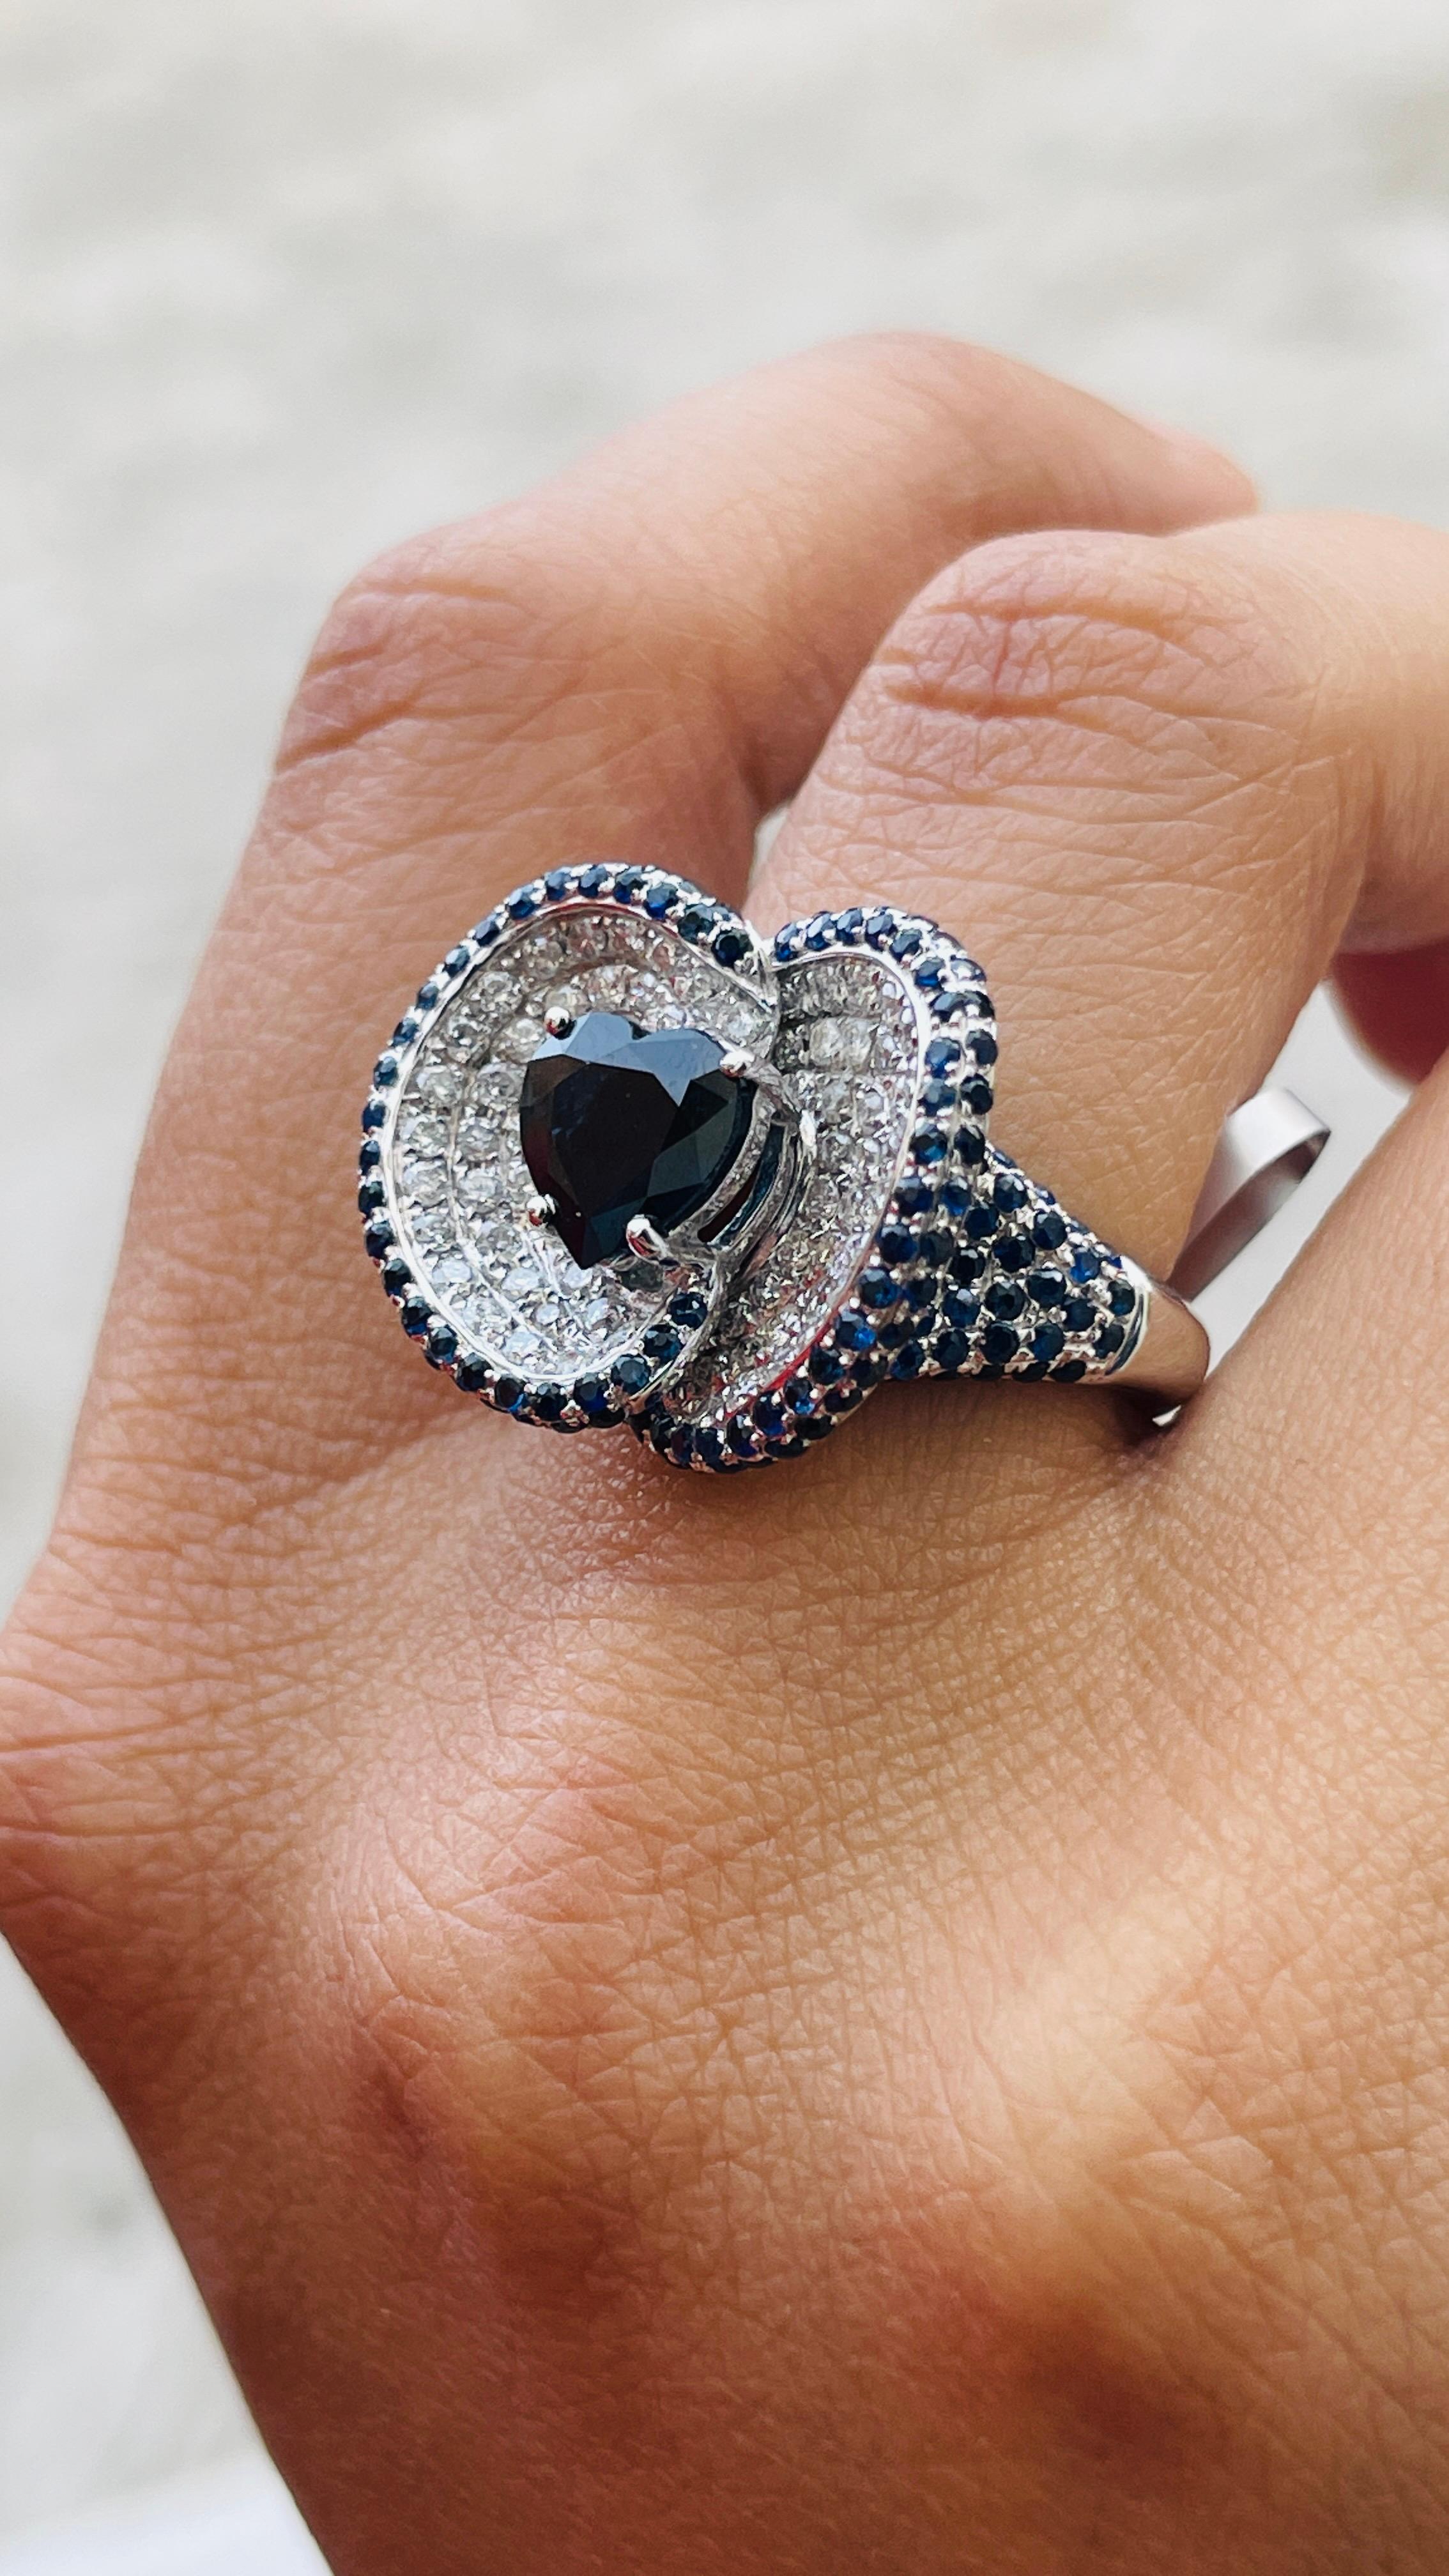 For Sale:  3.35 Carat Heart Cut Blue Sapphire and Diamond Unique Ring in 14K White Gold 6